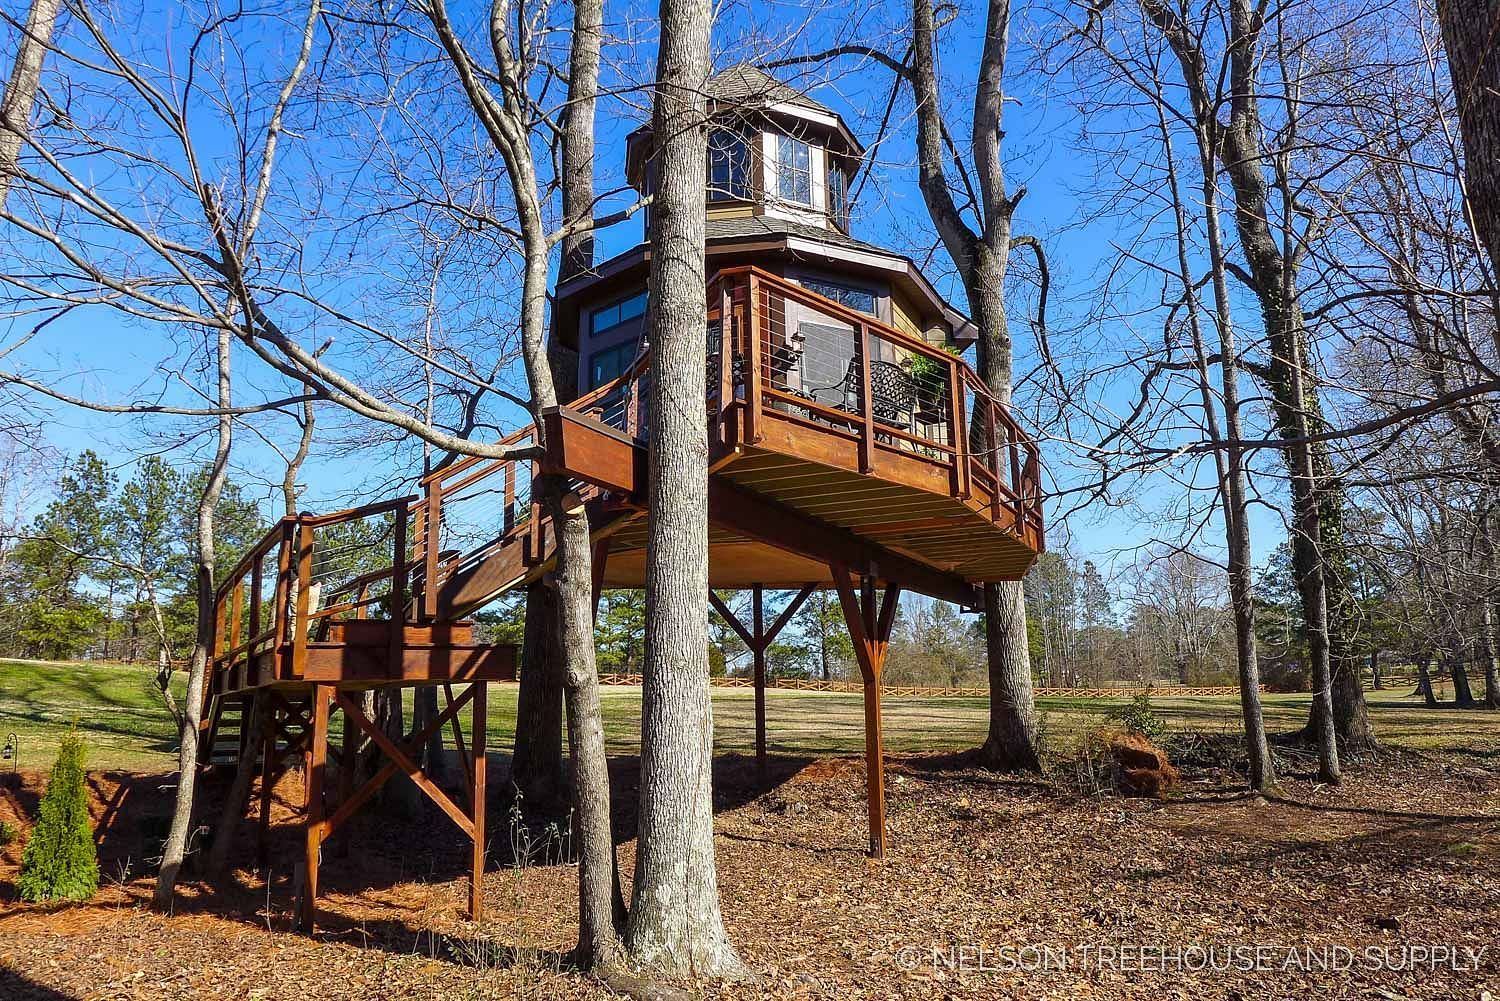 Shaquille O&#039;Neal&#039;s bespoke treehouse [Source: Nelson Treehouse and Supply]